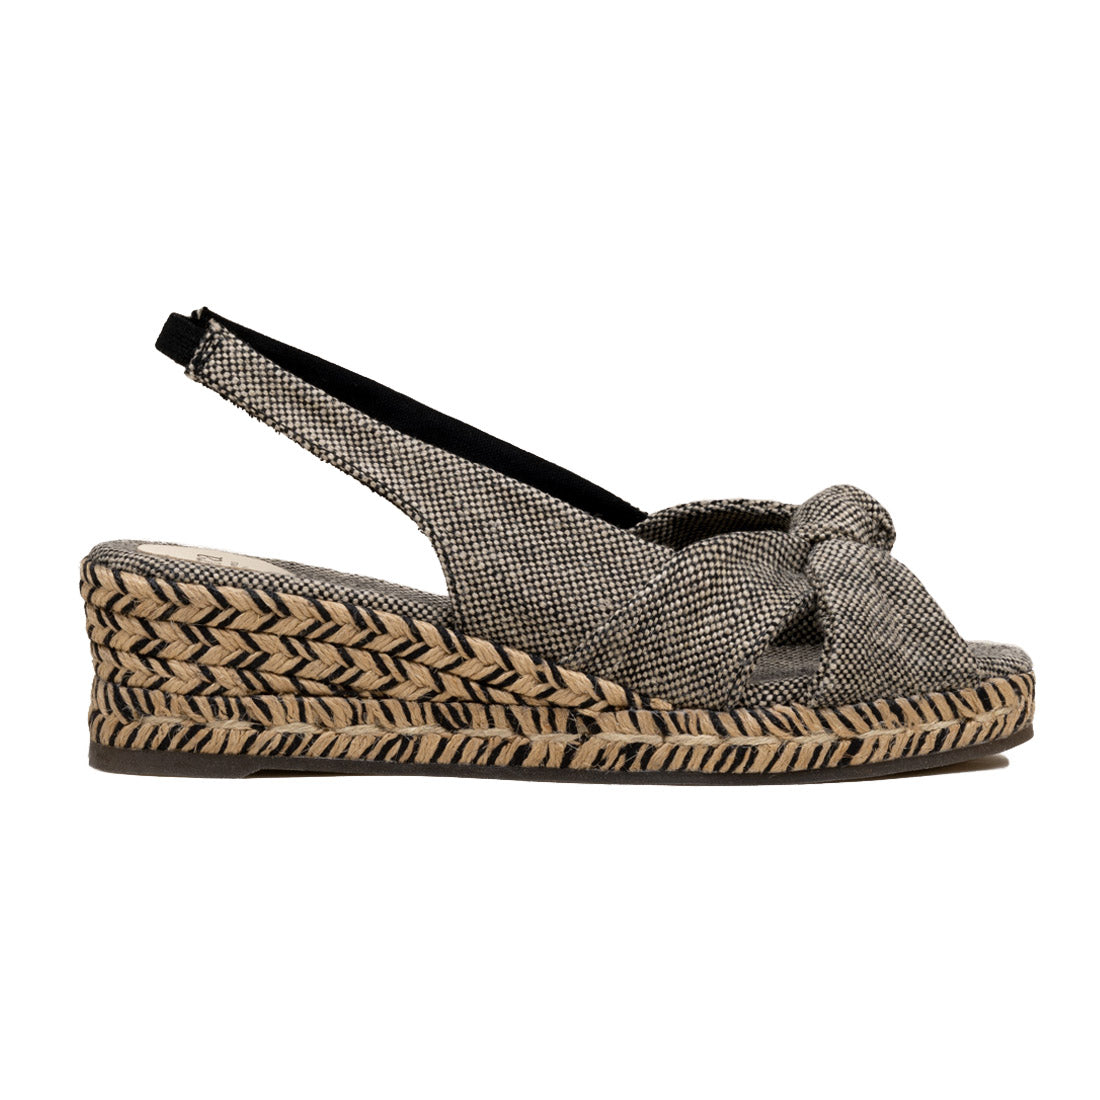 MARGARET Black | TIERRA Collection | espadrilles wedges - Badt and Co